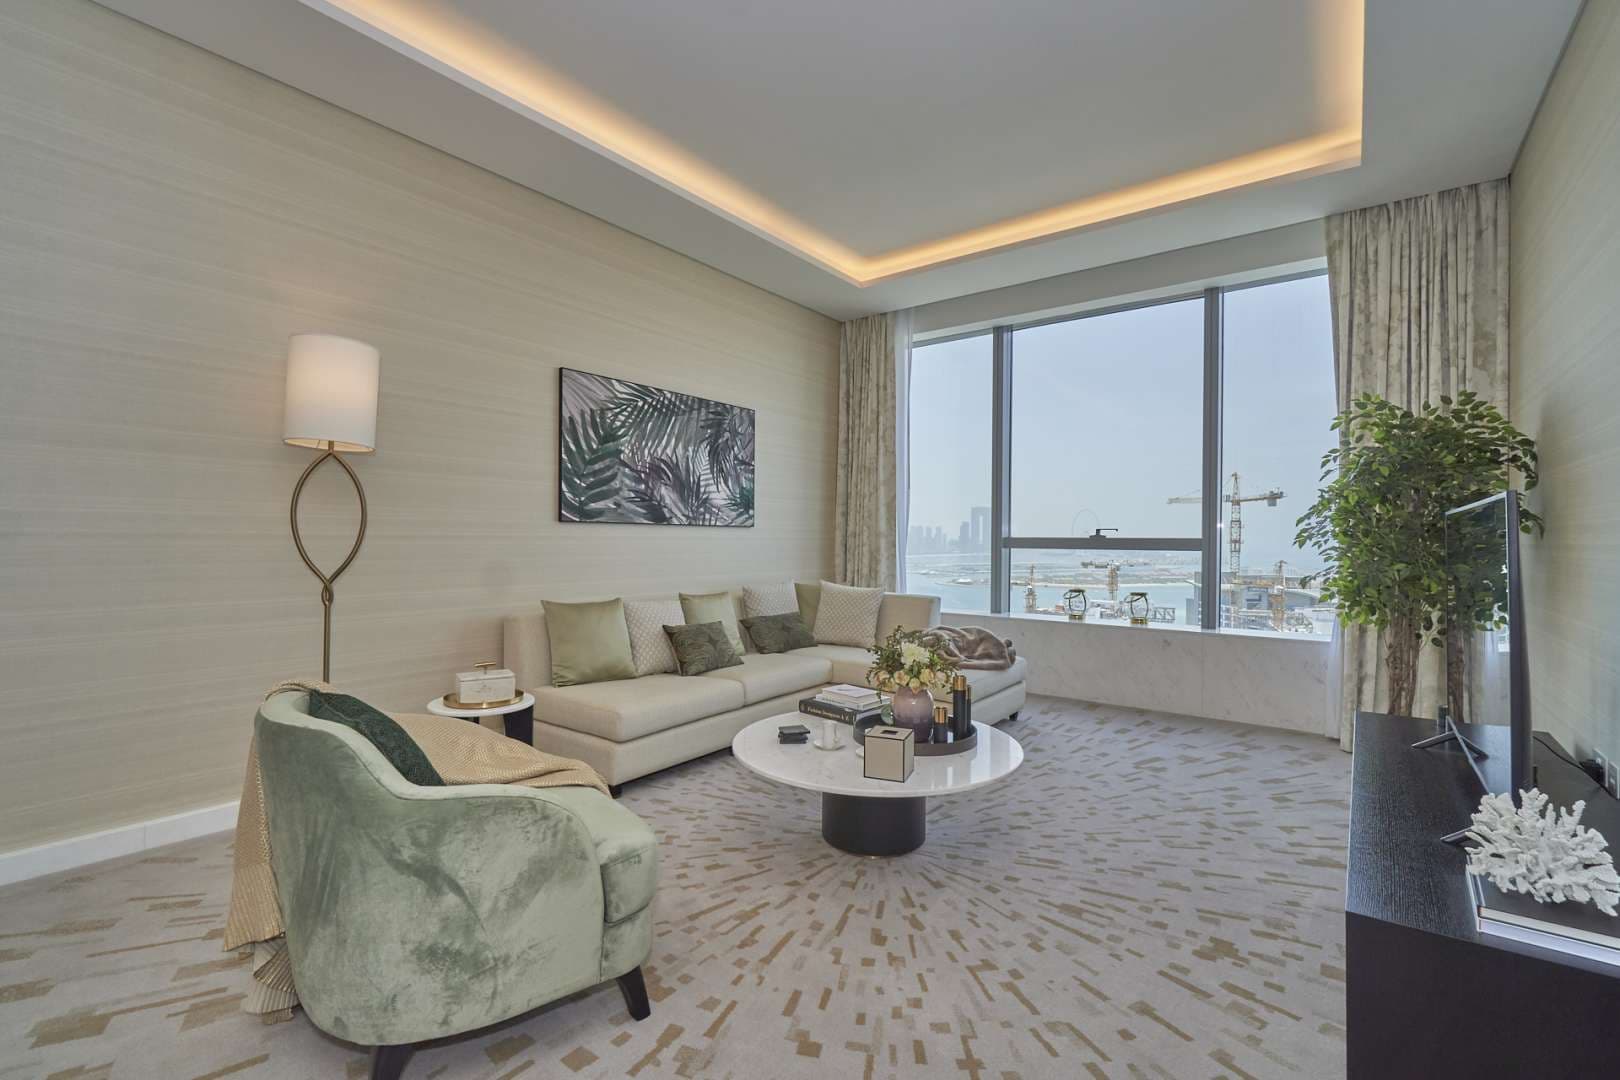 1 Bedroom Apartment For Sale The Palm Tower Lp07420 58f51c32f4bc8c0.jpg